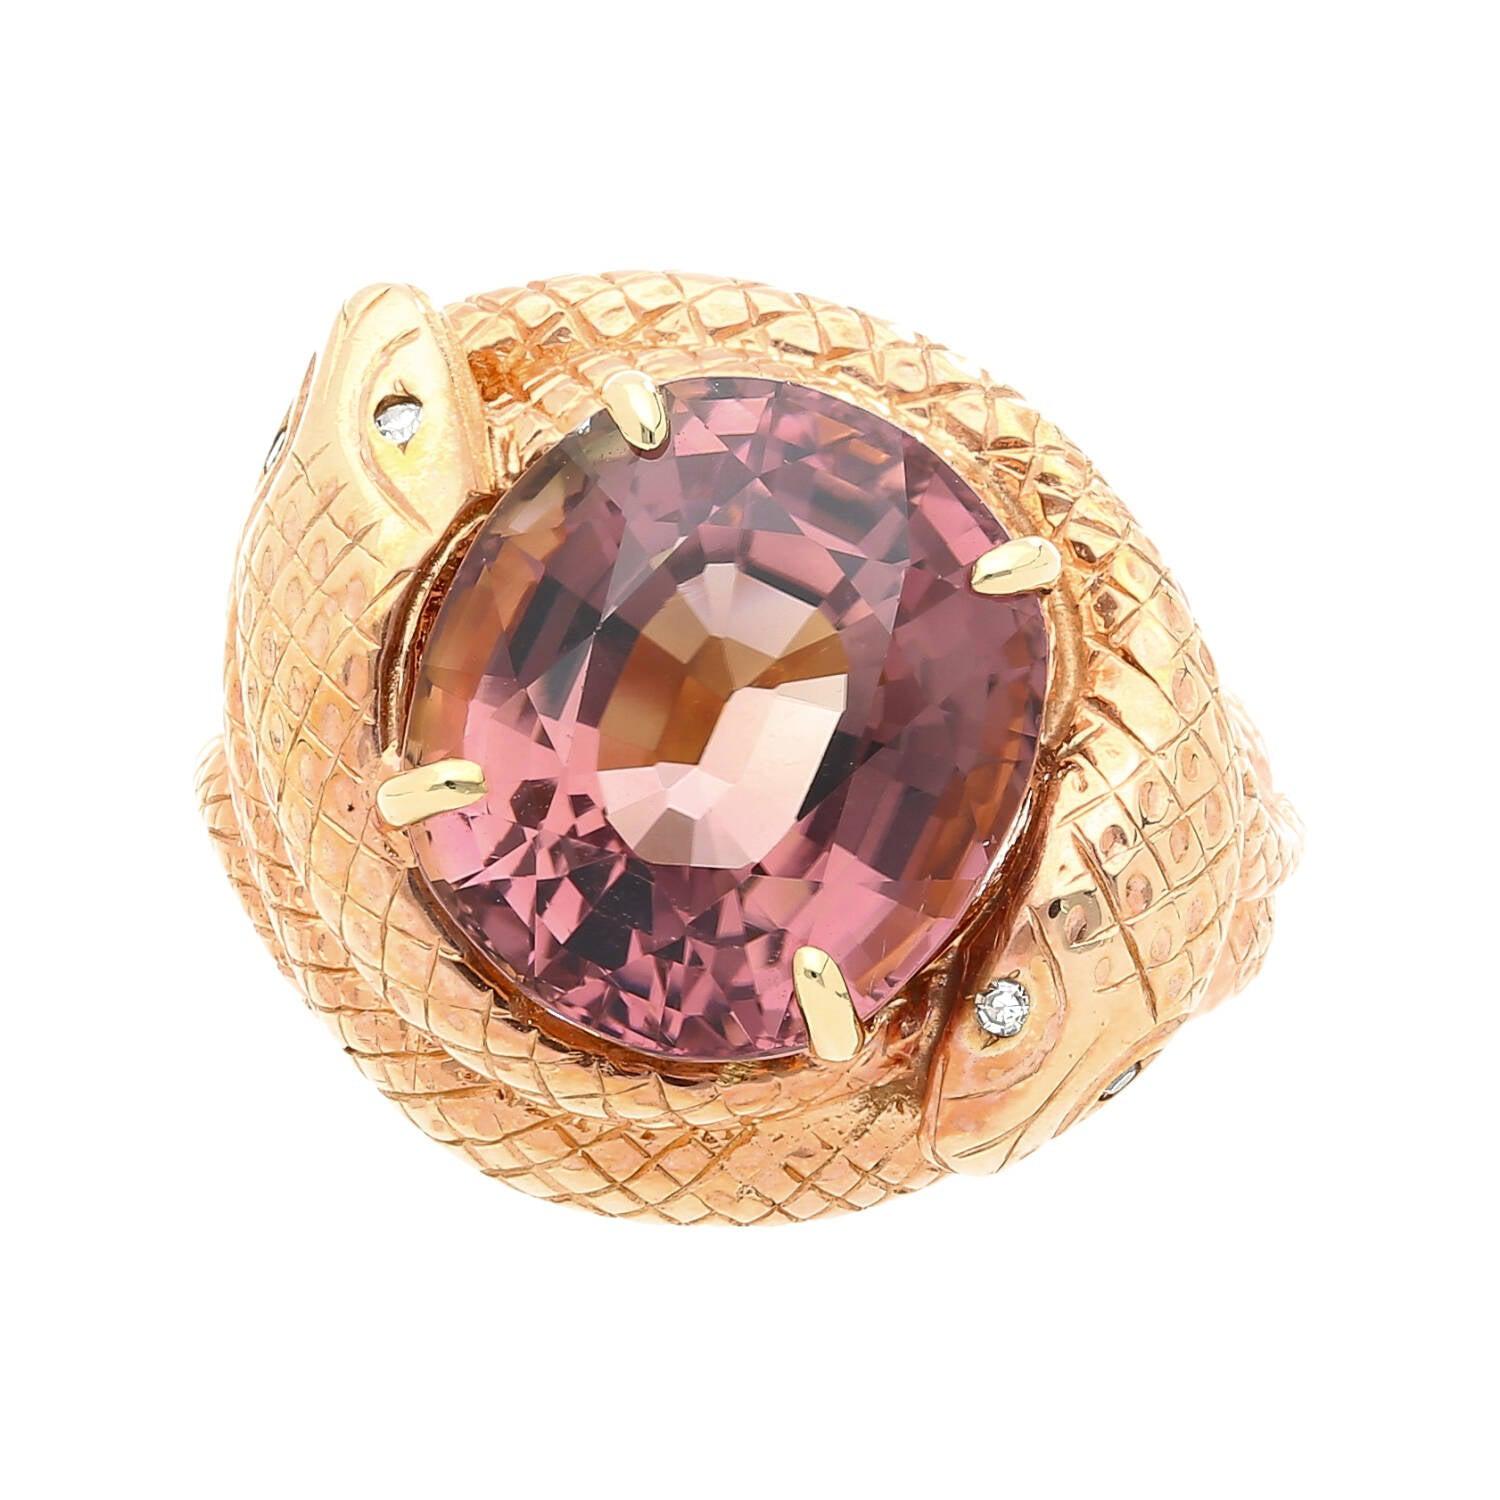 14K-Solid-Gold-Wrapping-Serpentine-Snake-Ring-With-10-Carat-Pink-Tourmaline-Semi-Precious-Jewelry.jpg